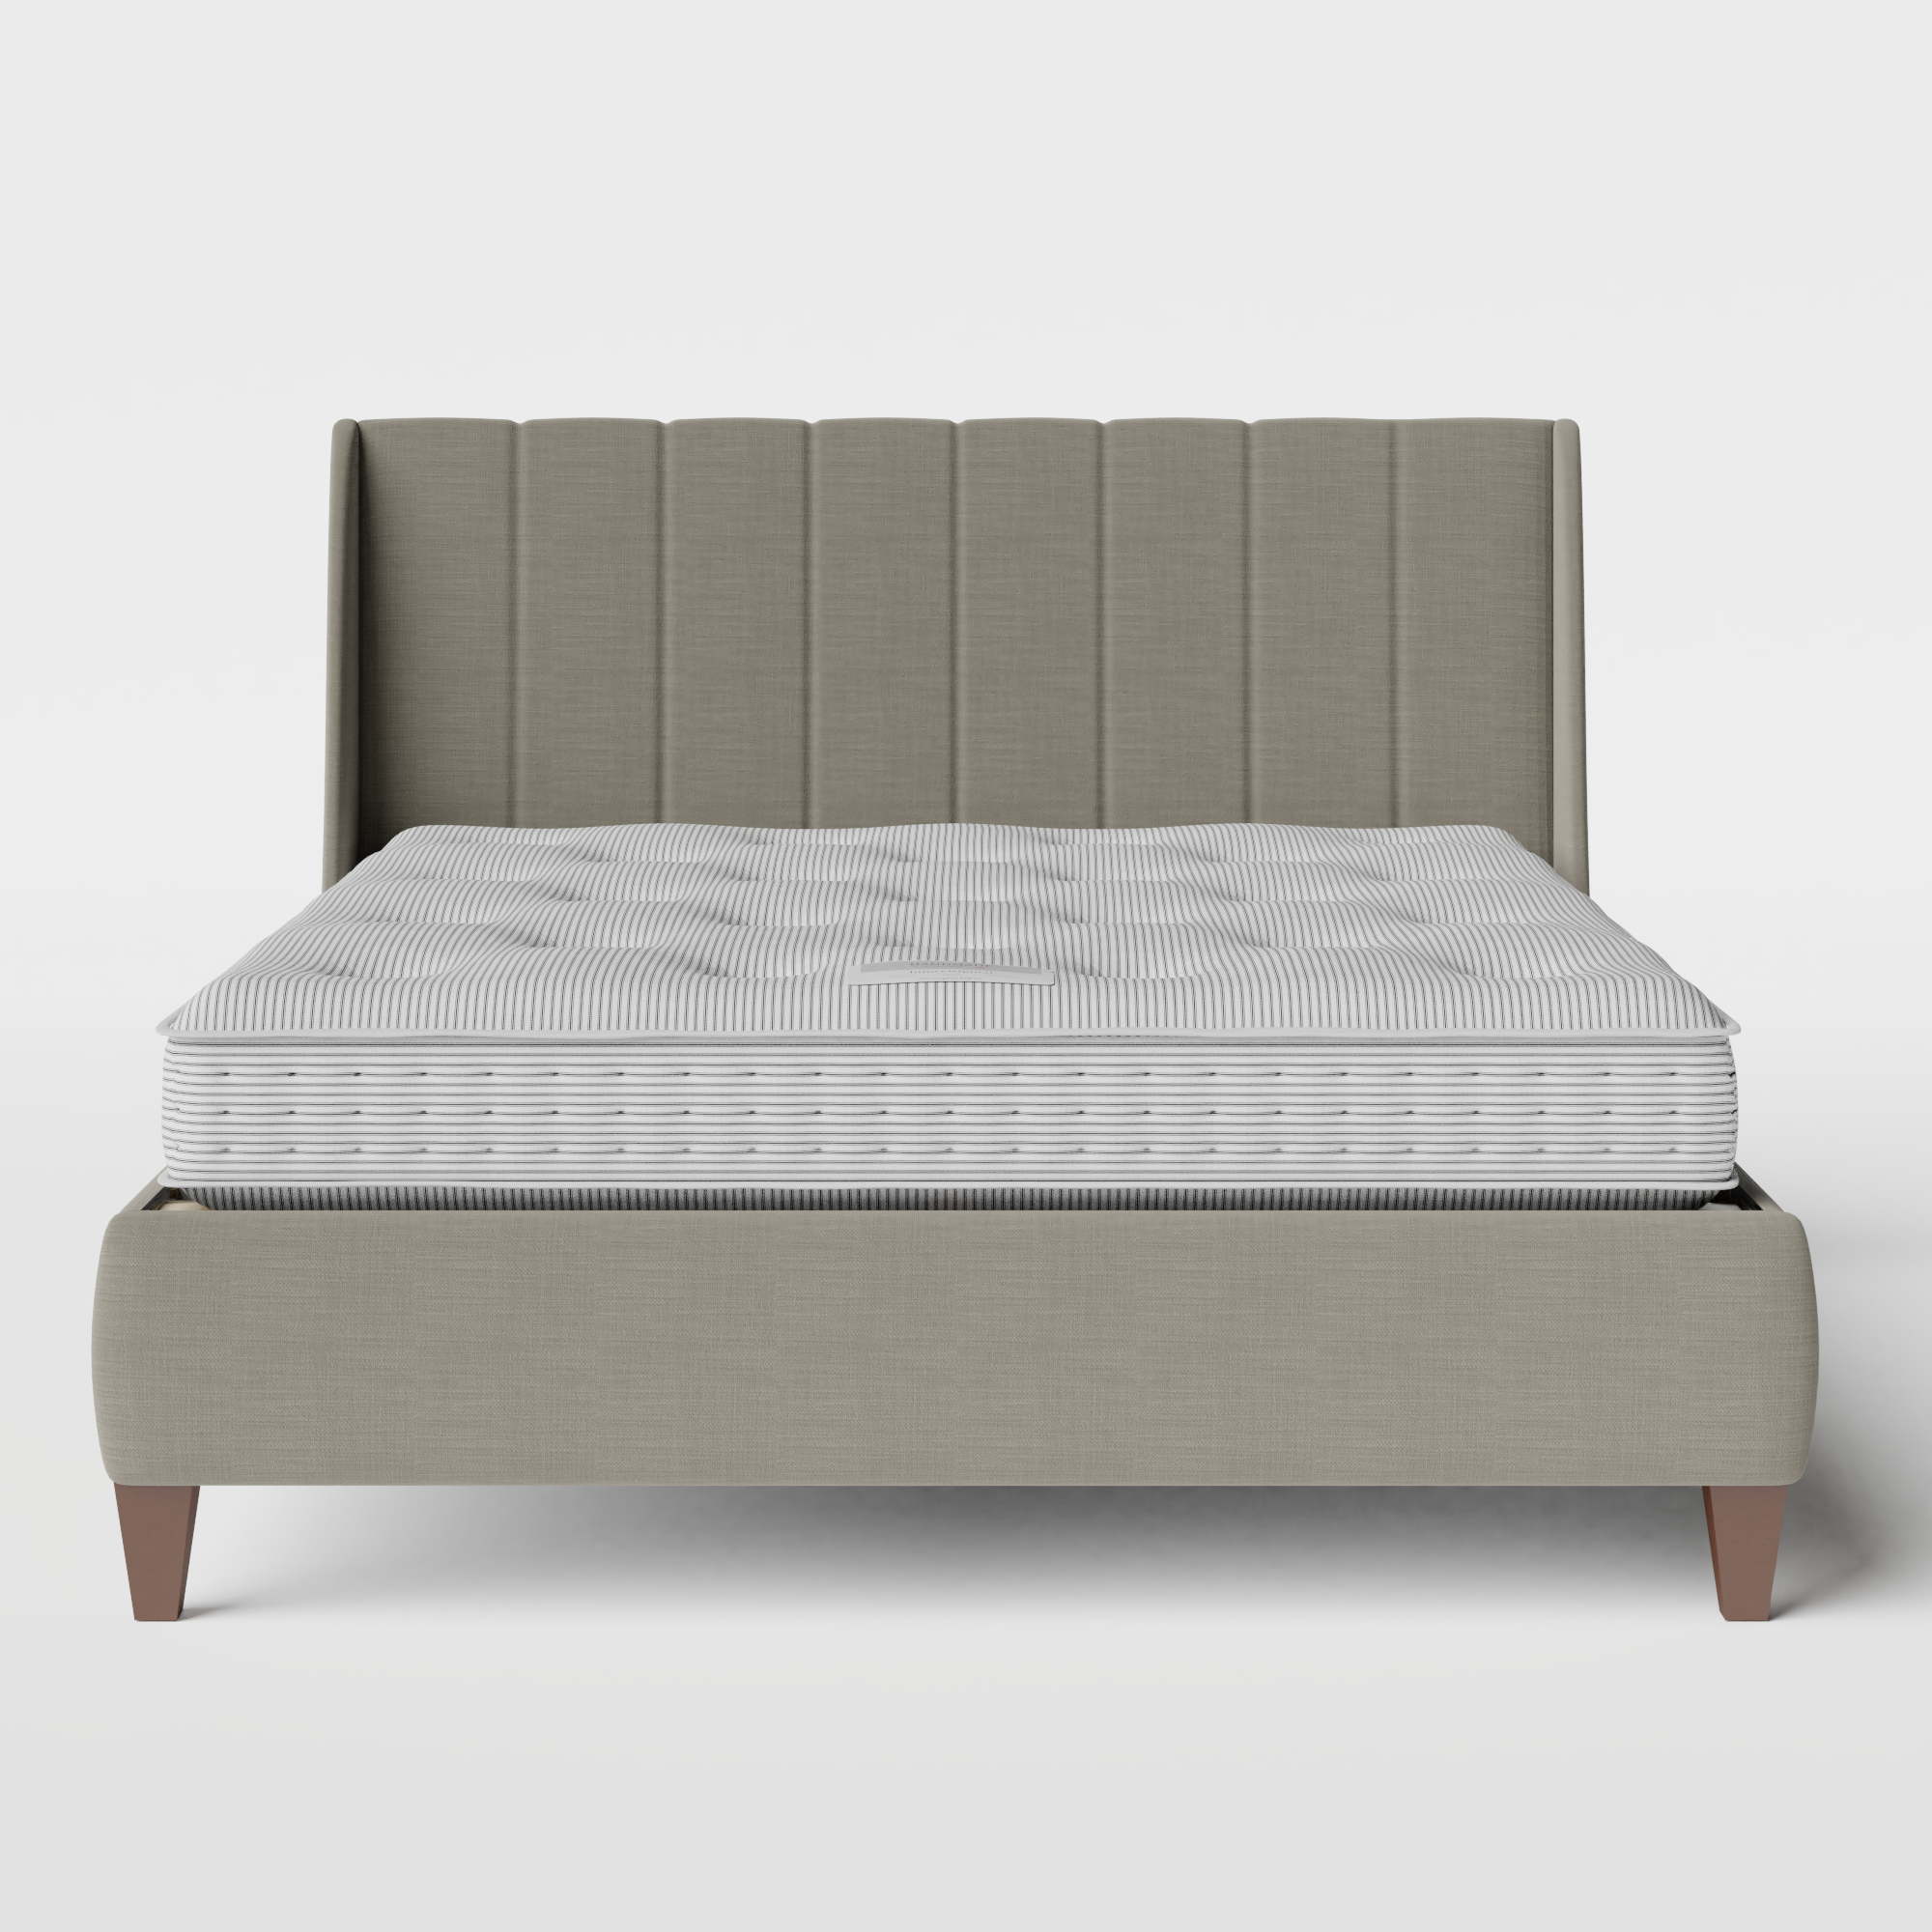 Sunderland Pleated upholstered bed in grey fabric with Juno mattress